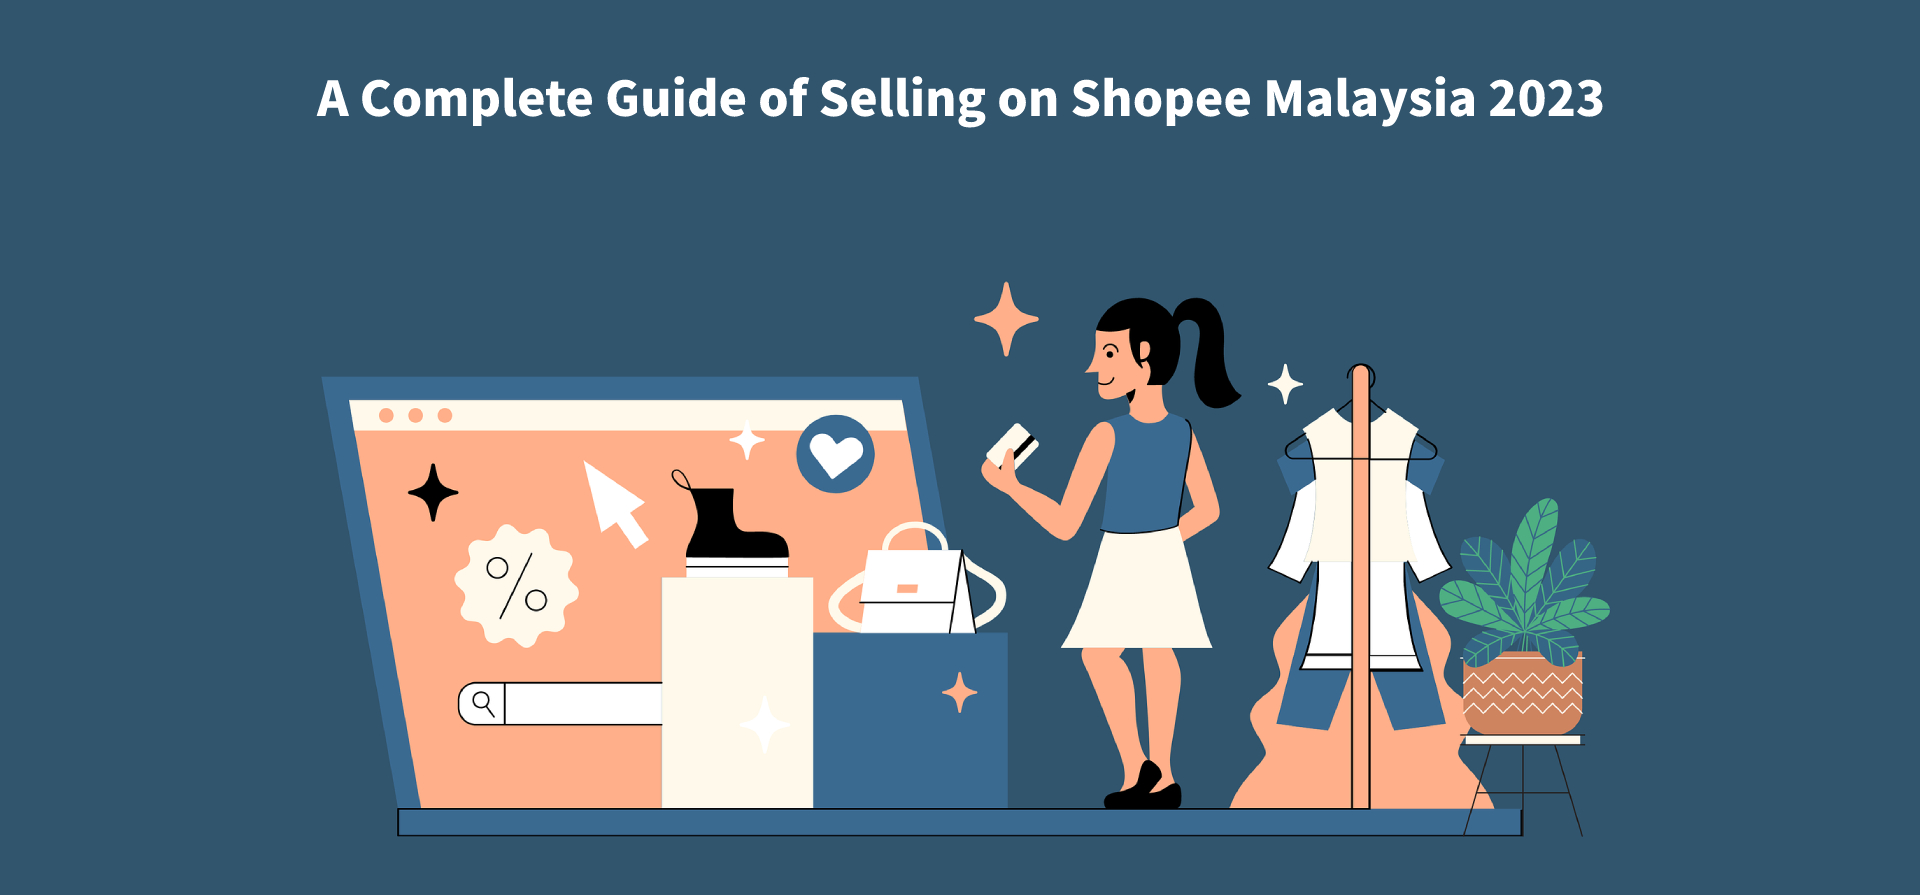 A Complete Guide of Selling on Shopee Malaysia 2023